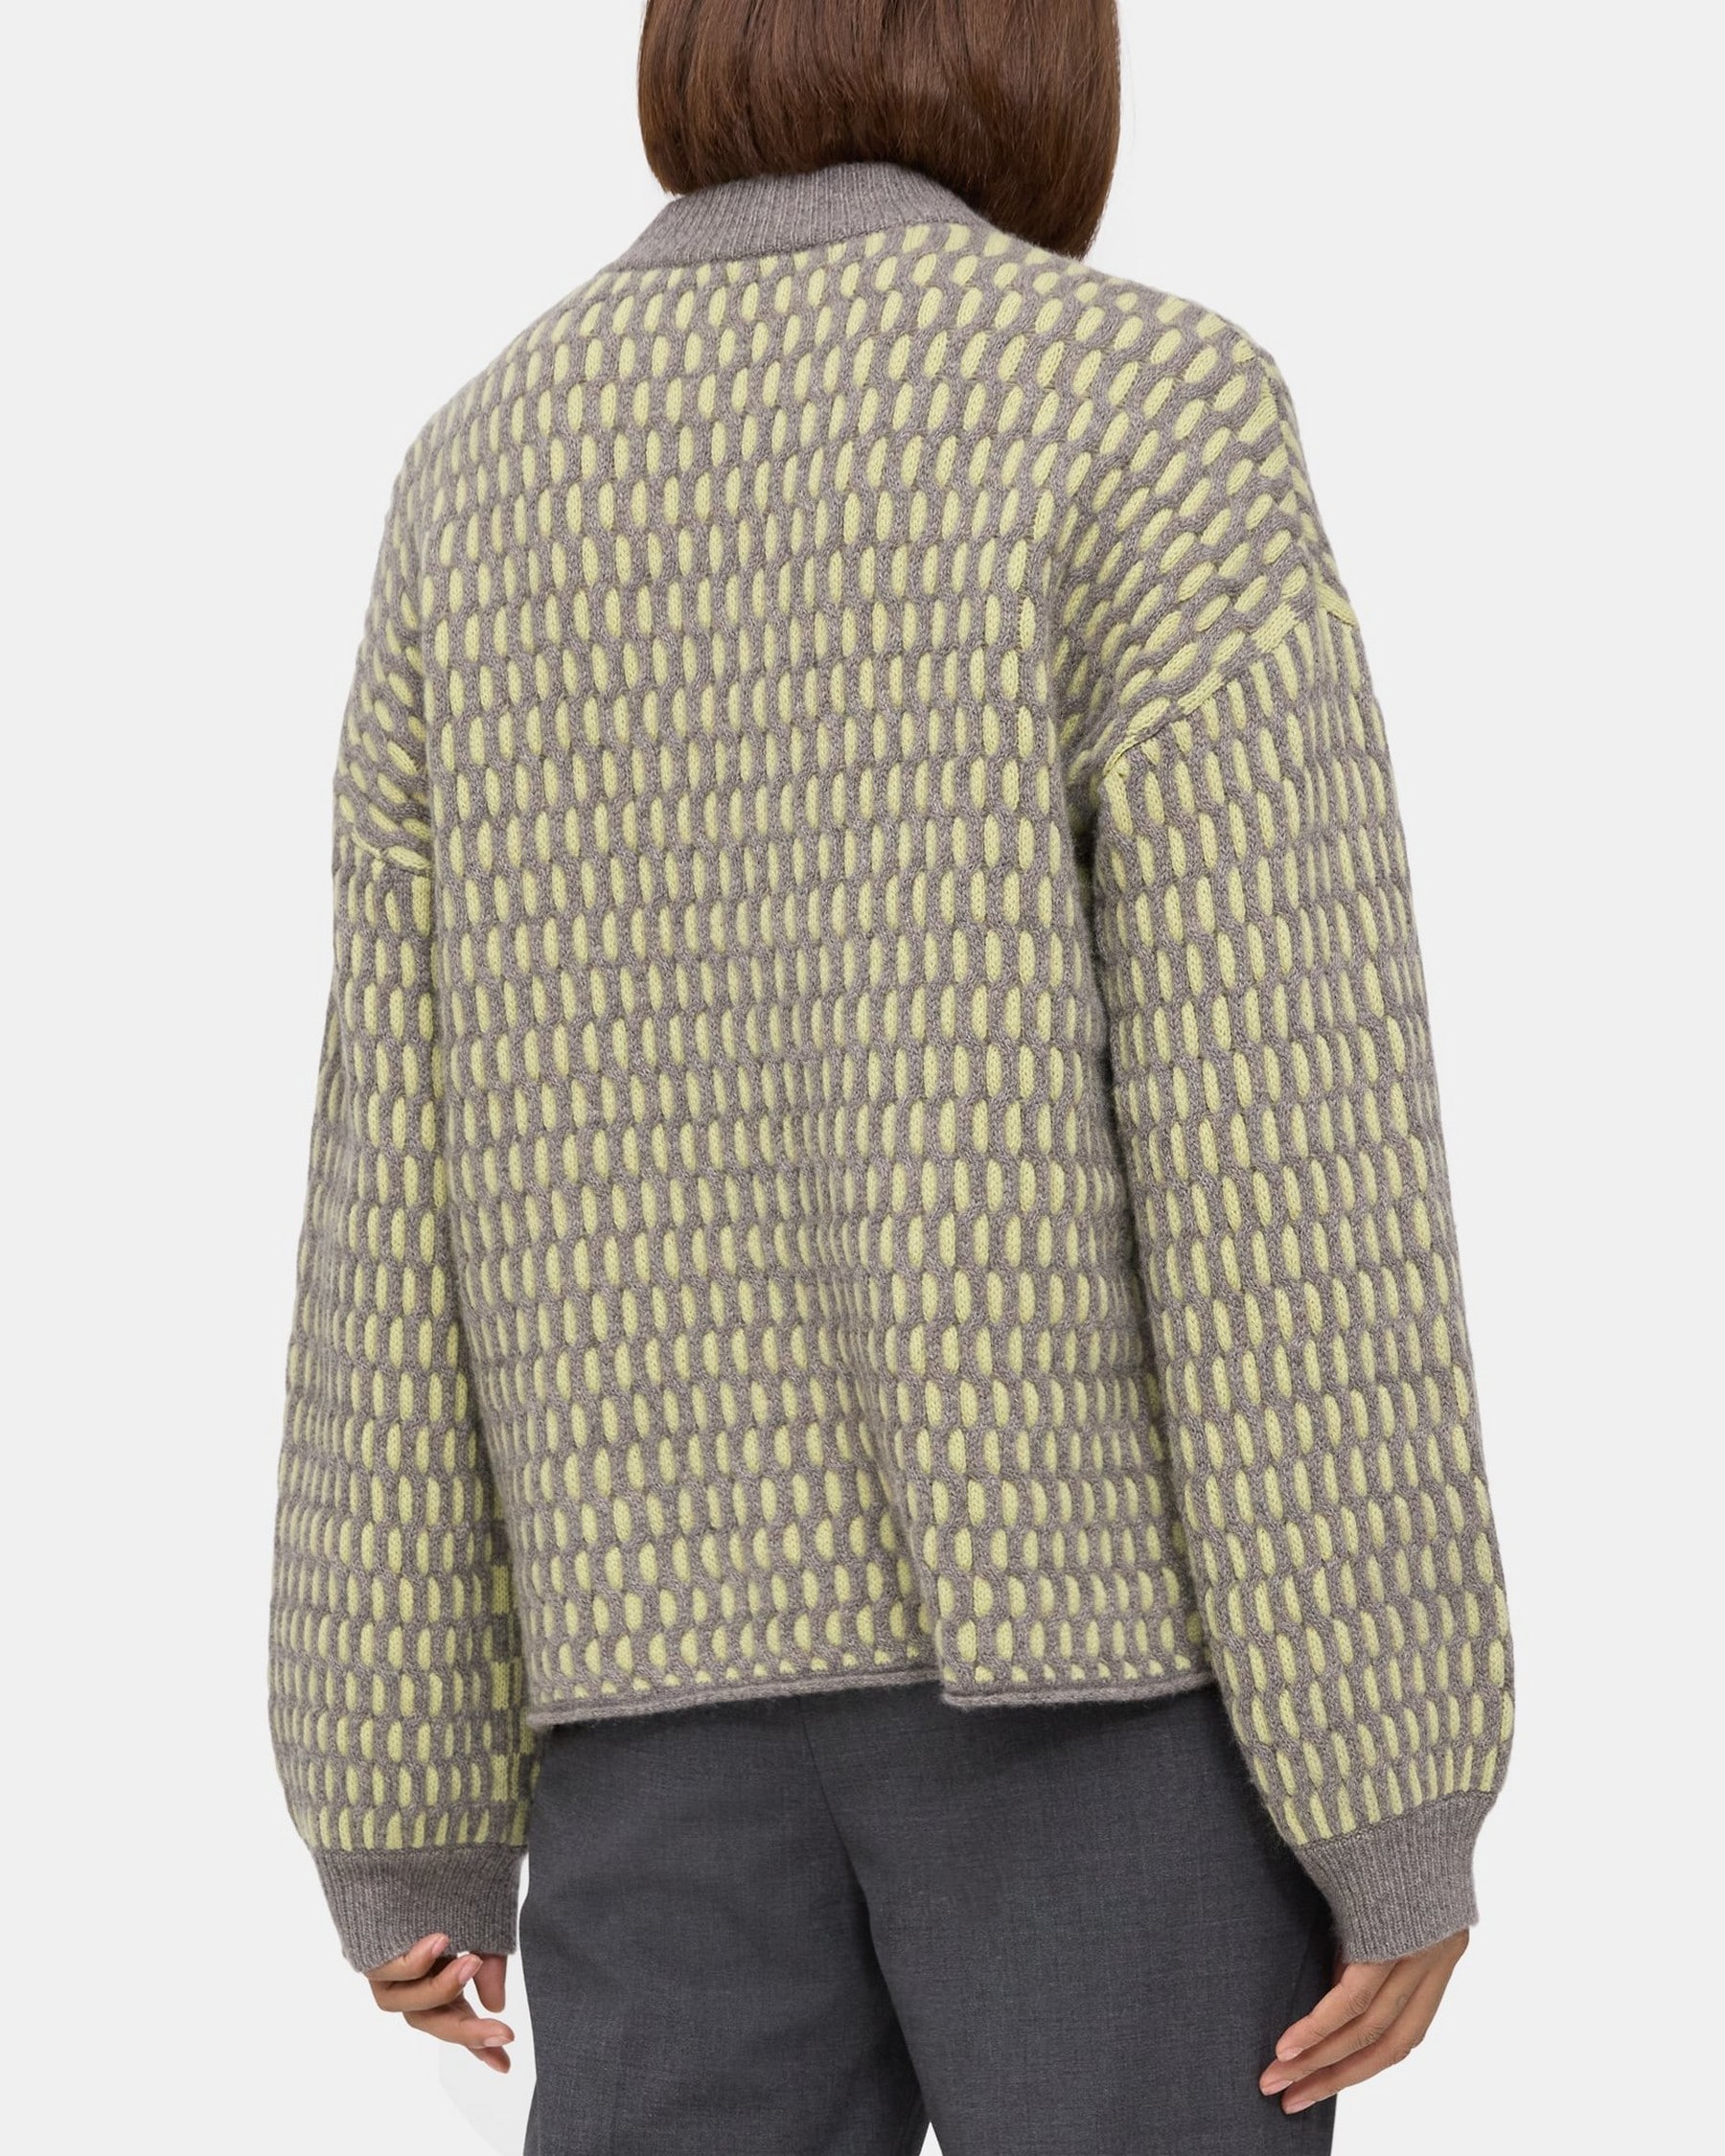 Two-Tone Cable-Knit Sweater in Cashmere